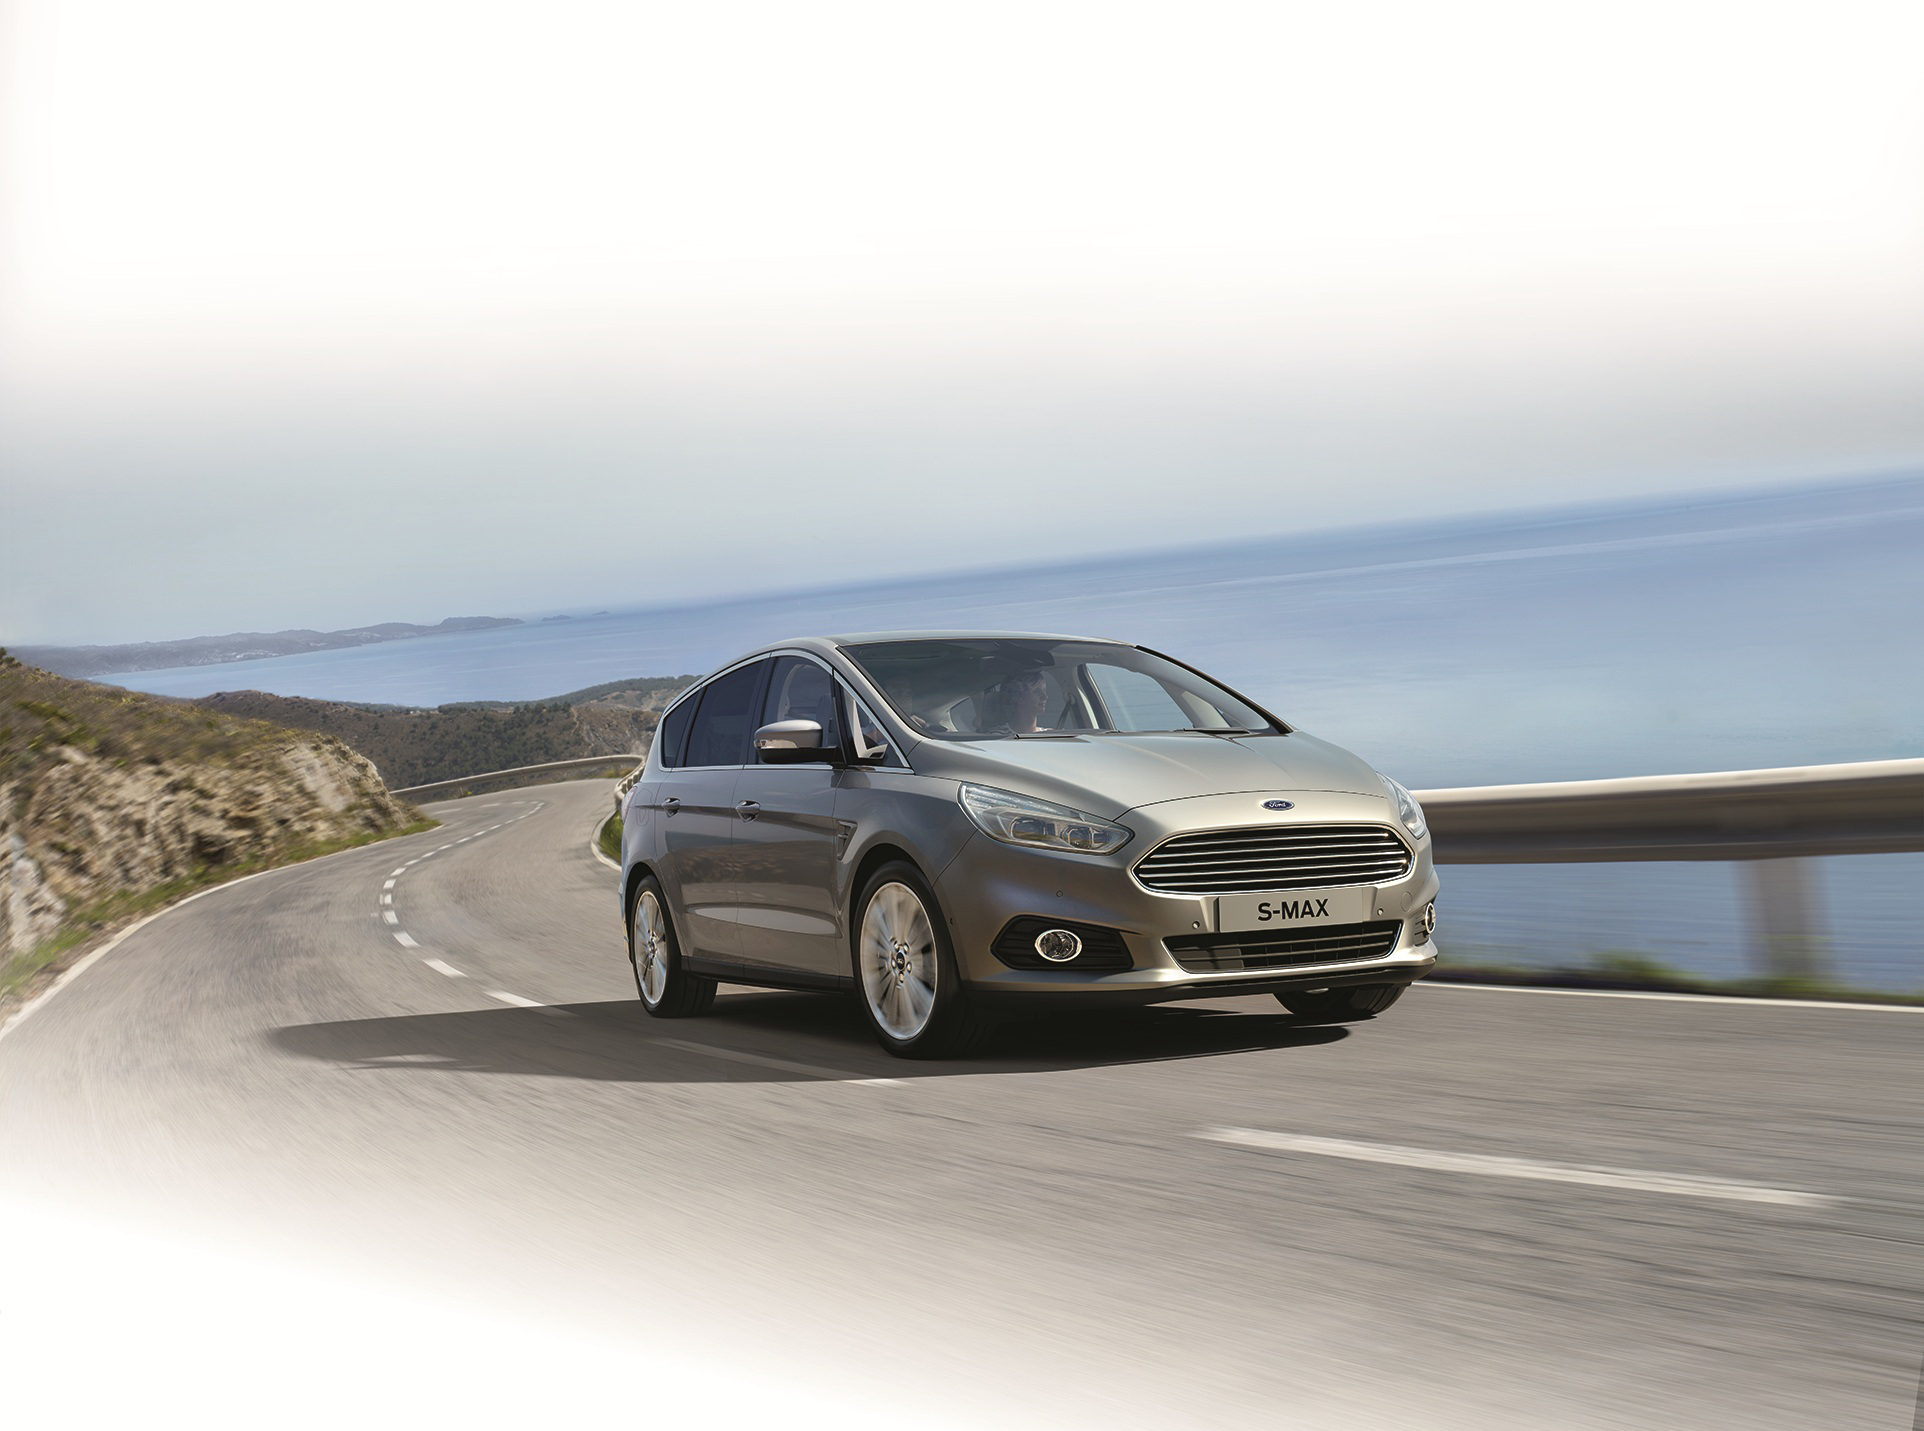 News: Ford S-Max